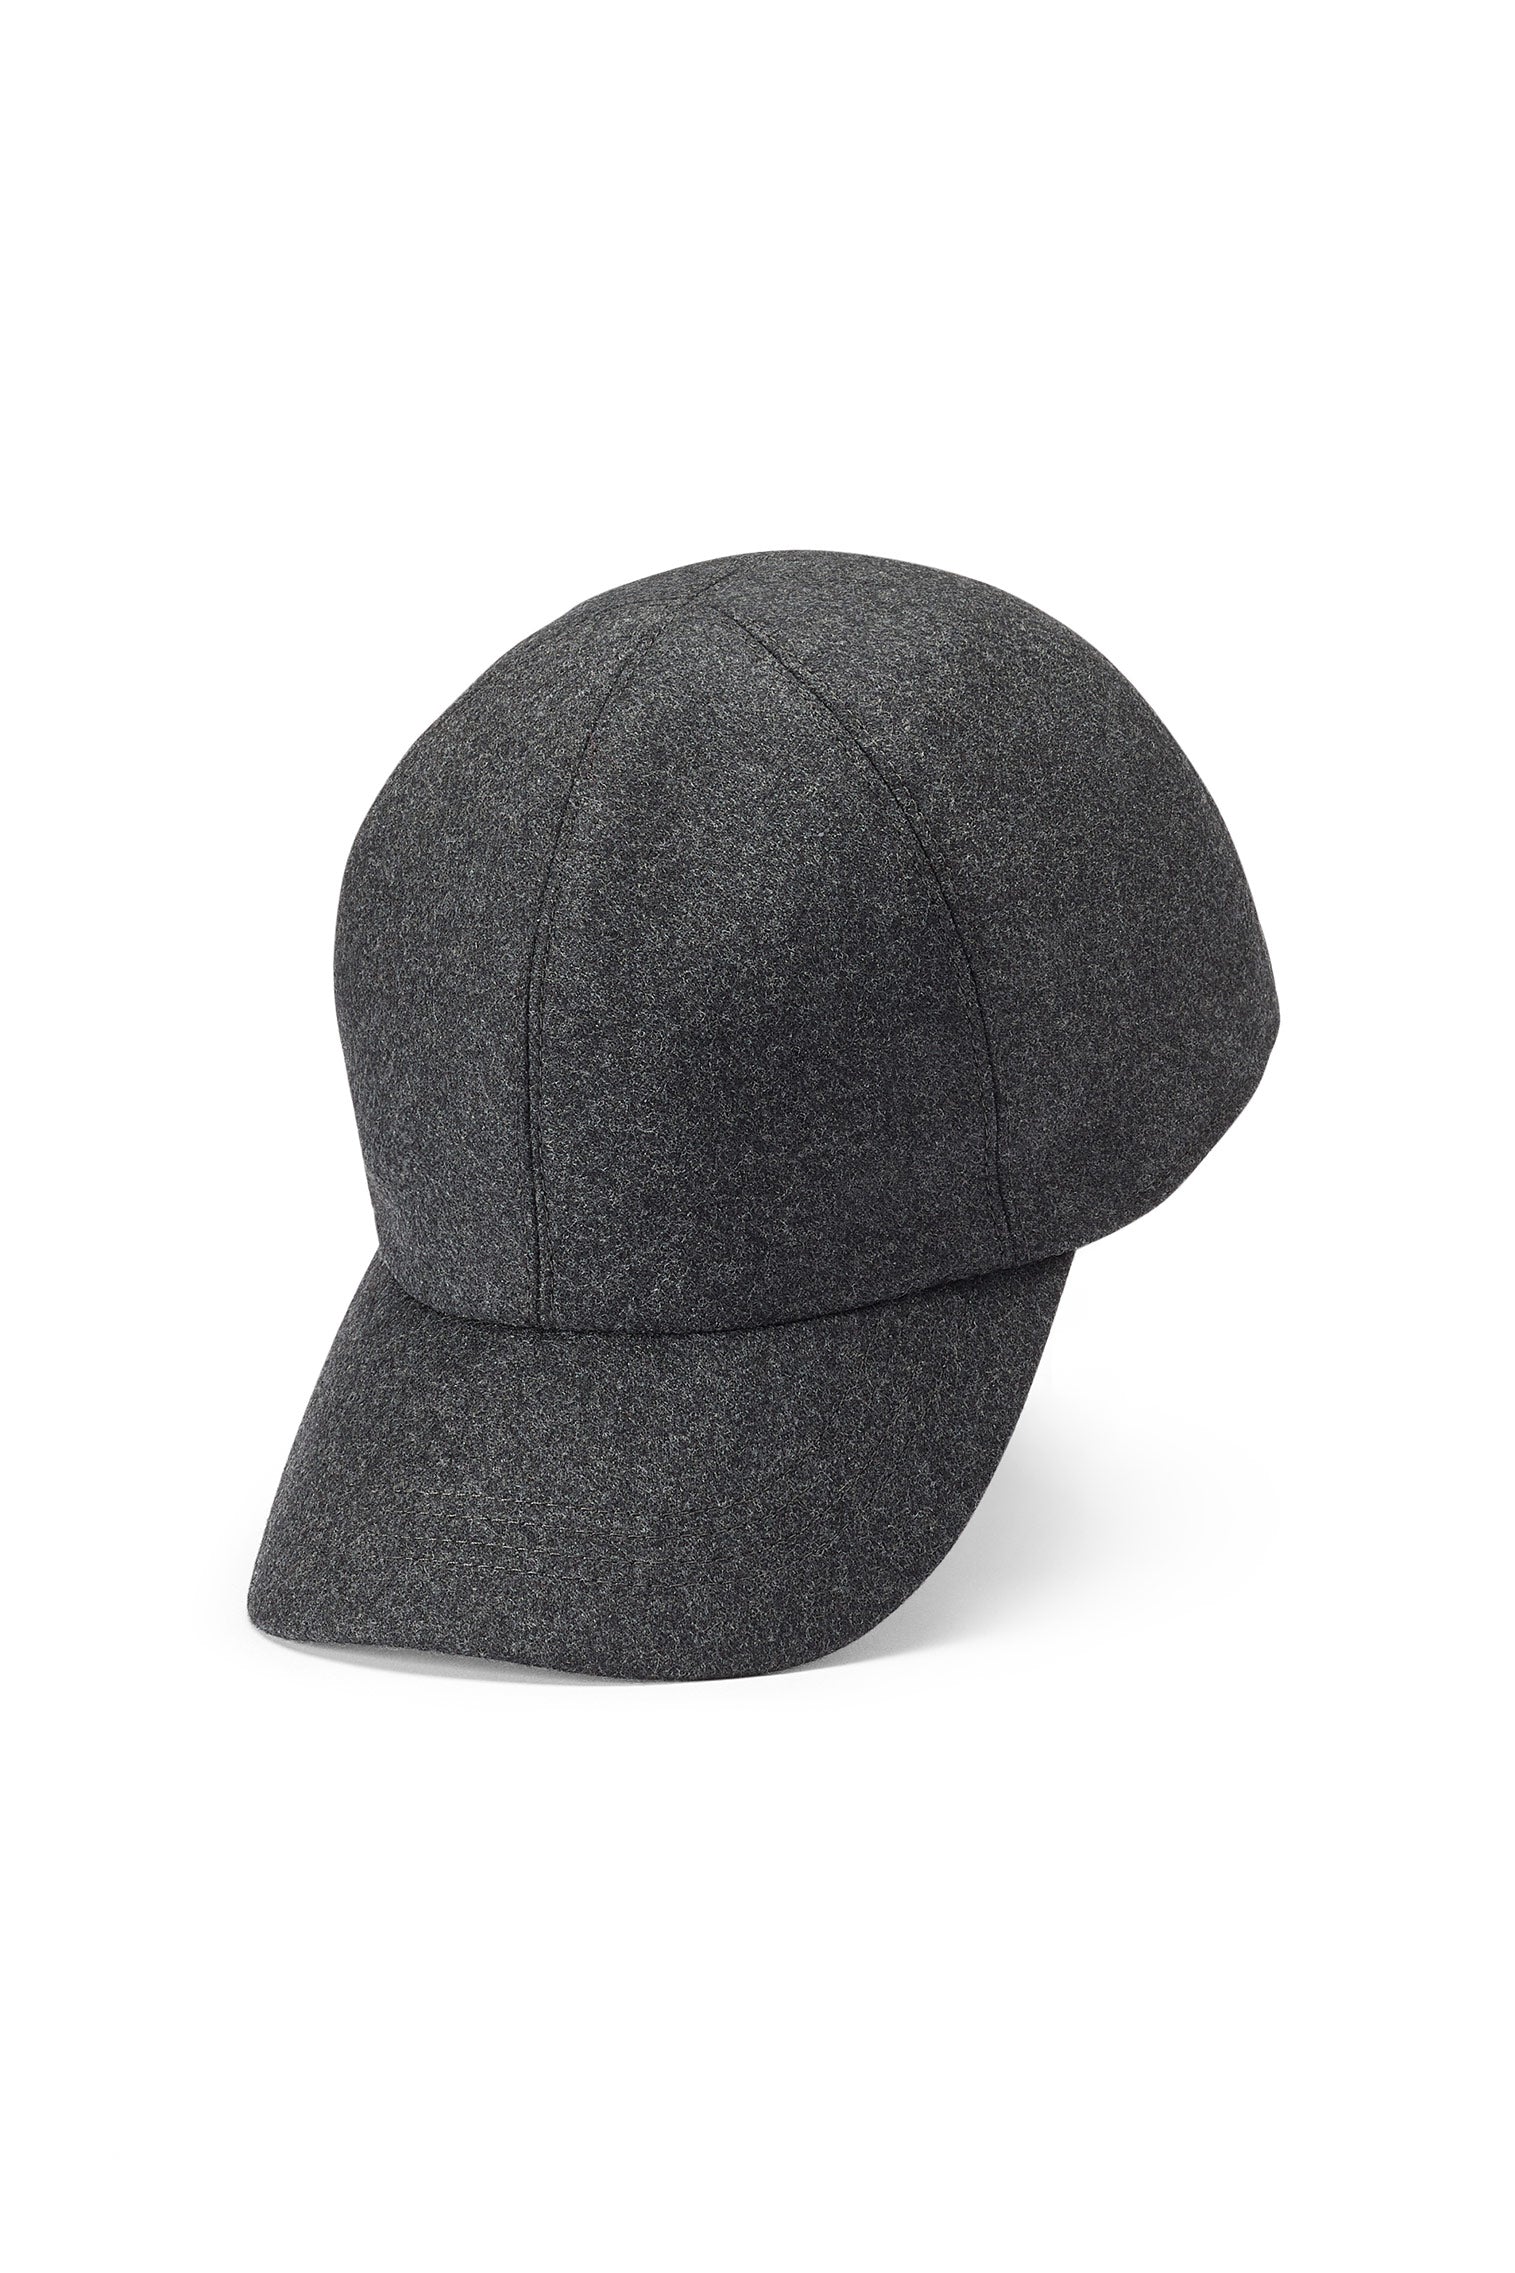 Visby Wool Baseball Cap - Hats for Square Face Shapes - Lock & Co. Hatters London UK